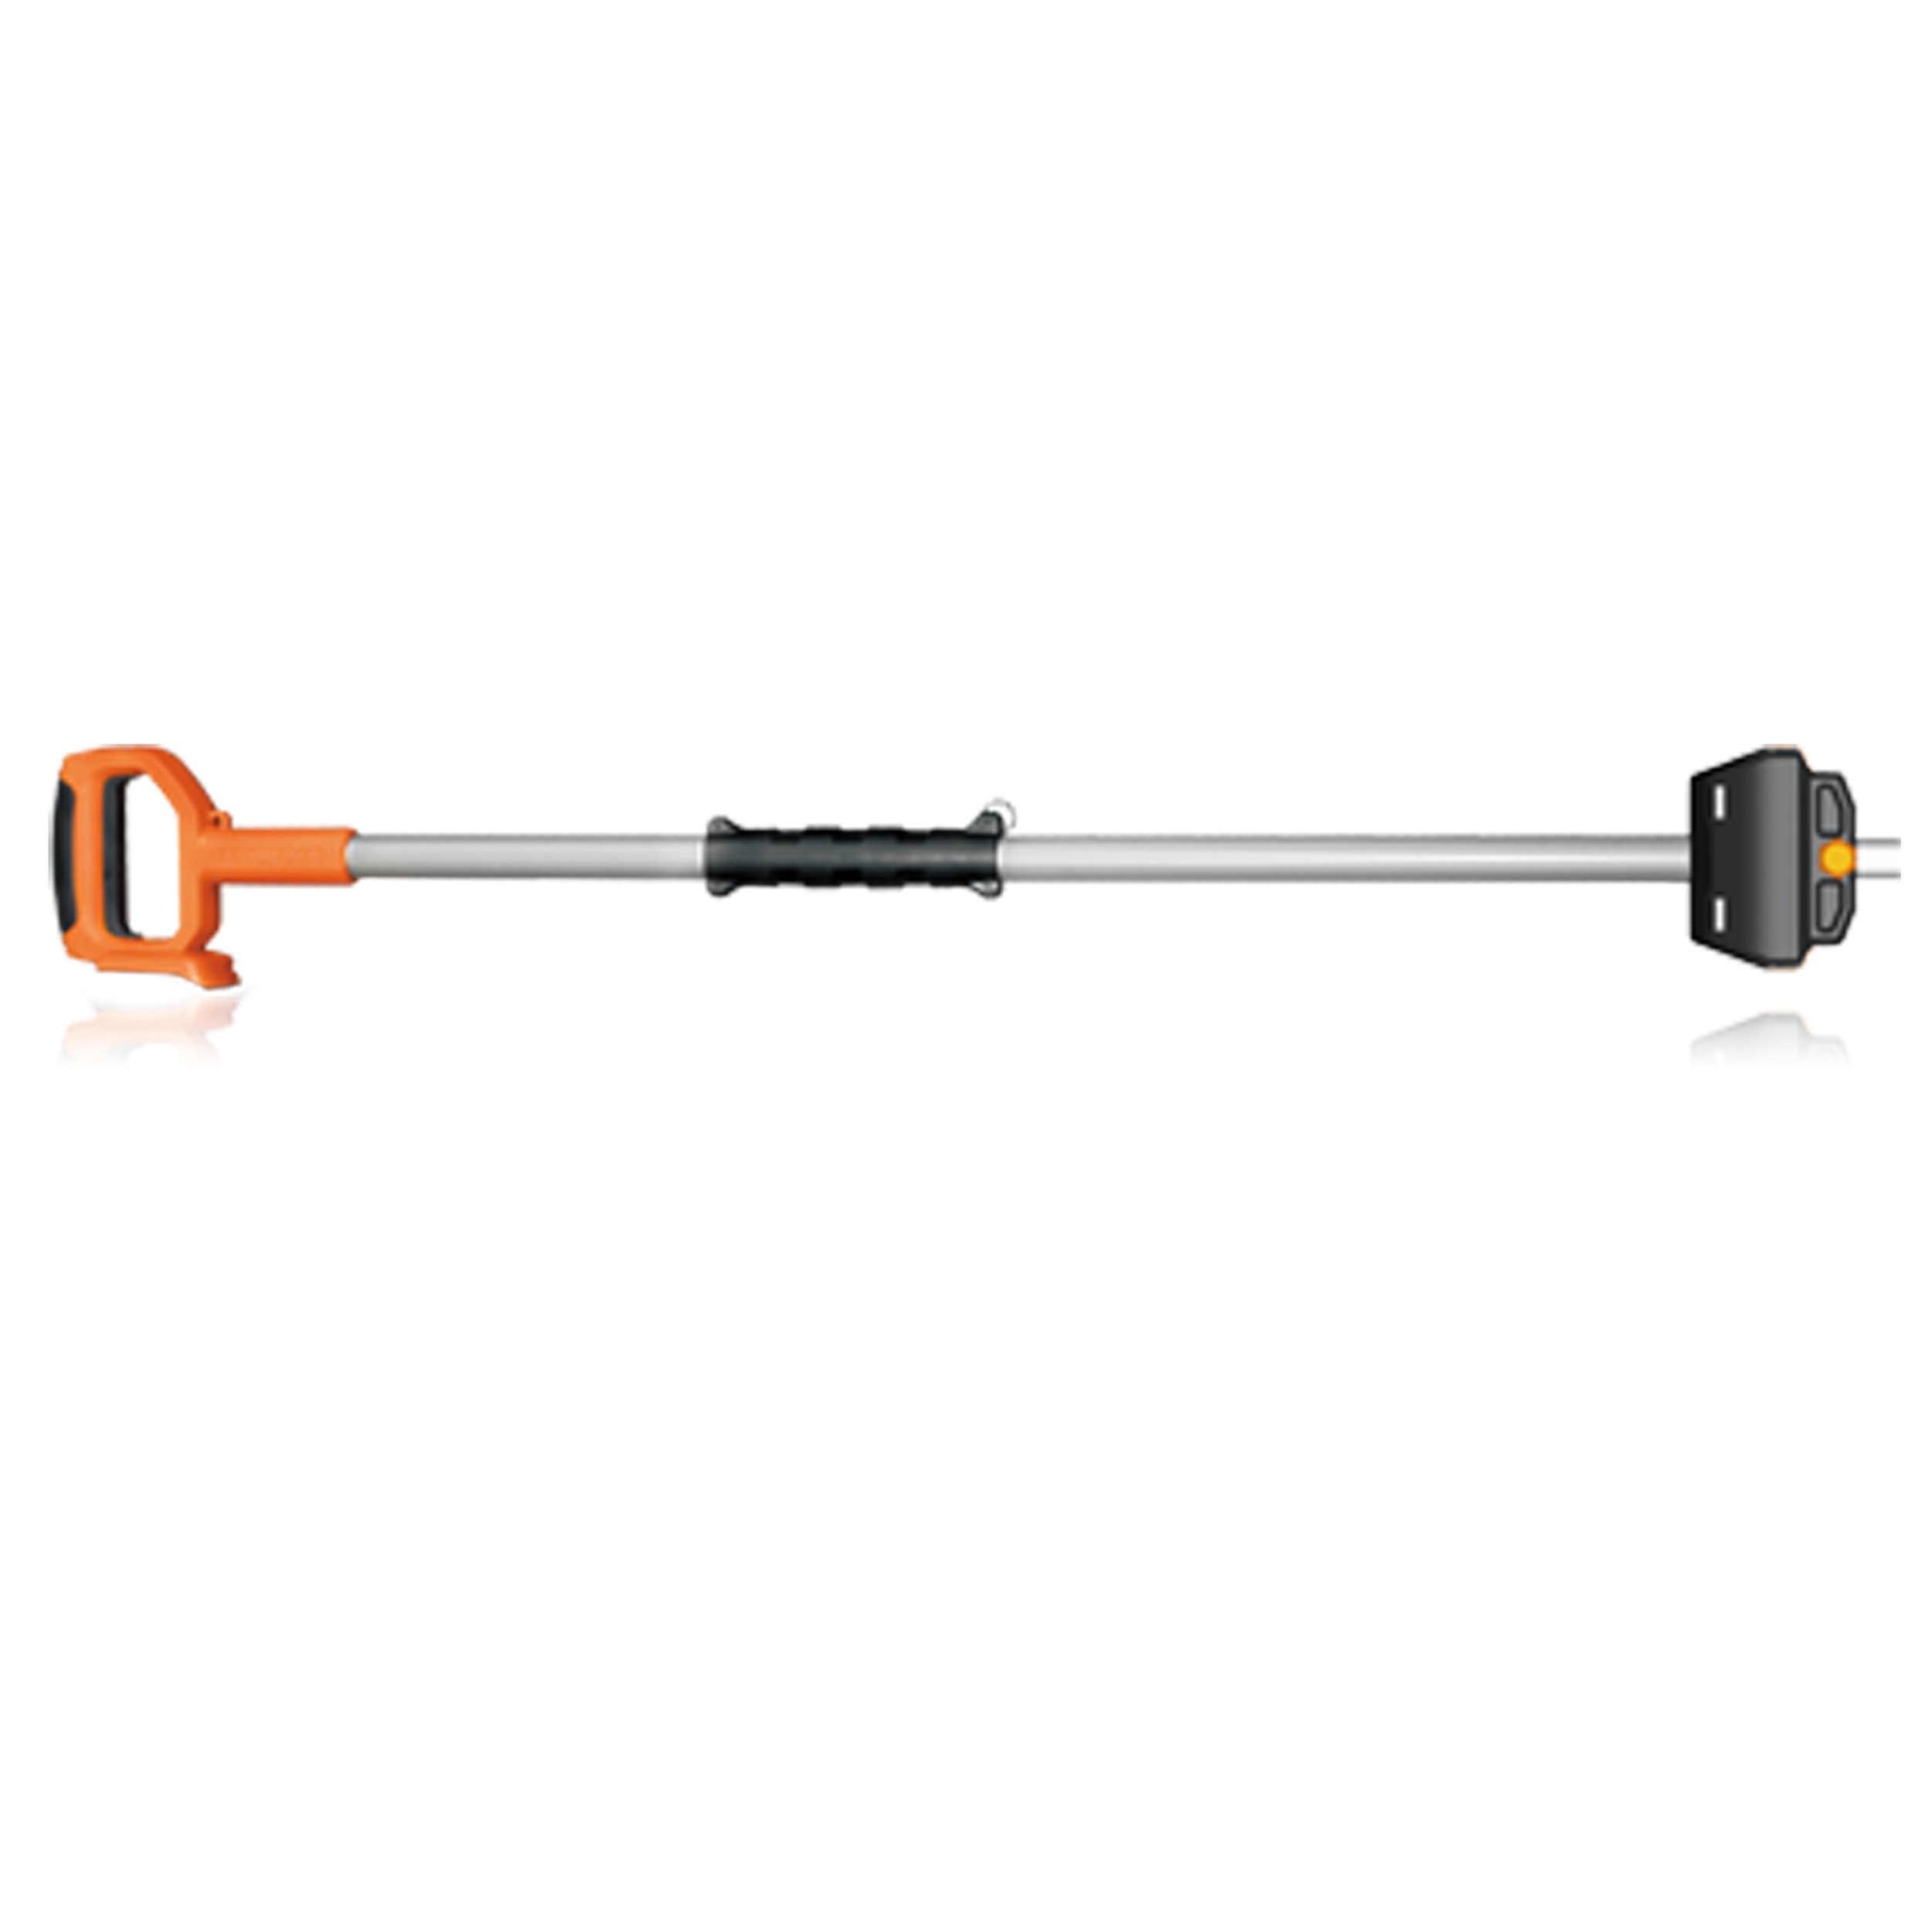 Cordless Jawsaw Extension Pole For Wg320 Or Wg321